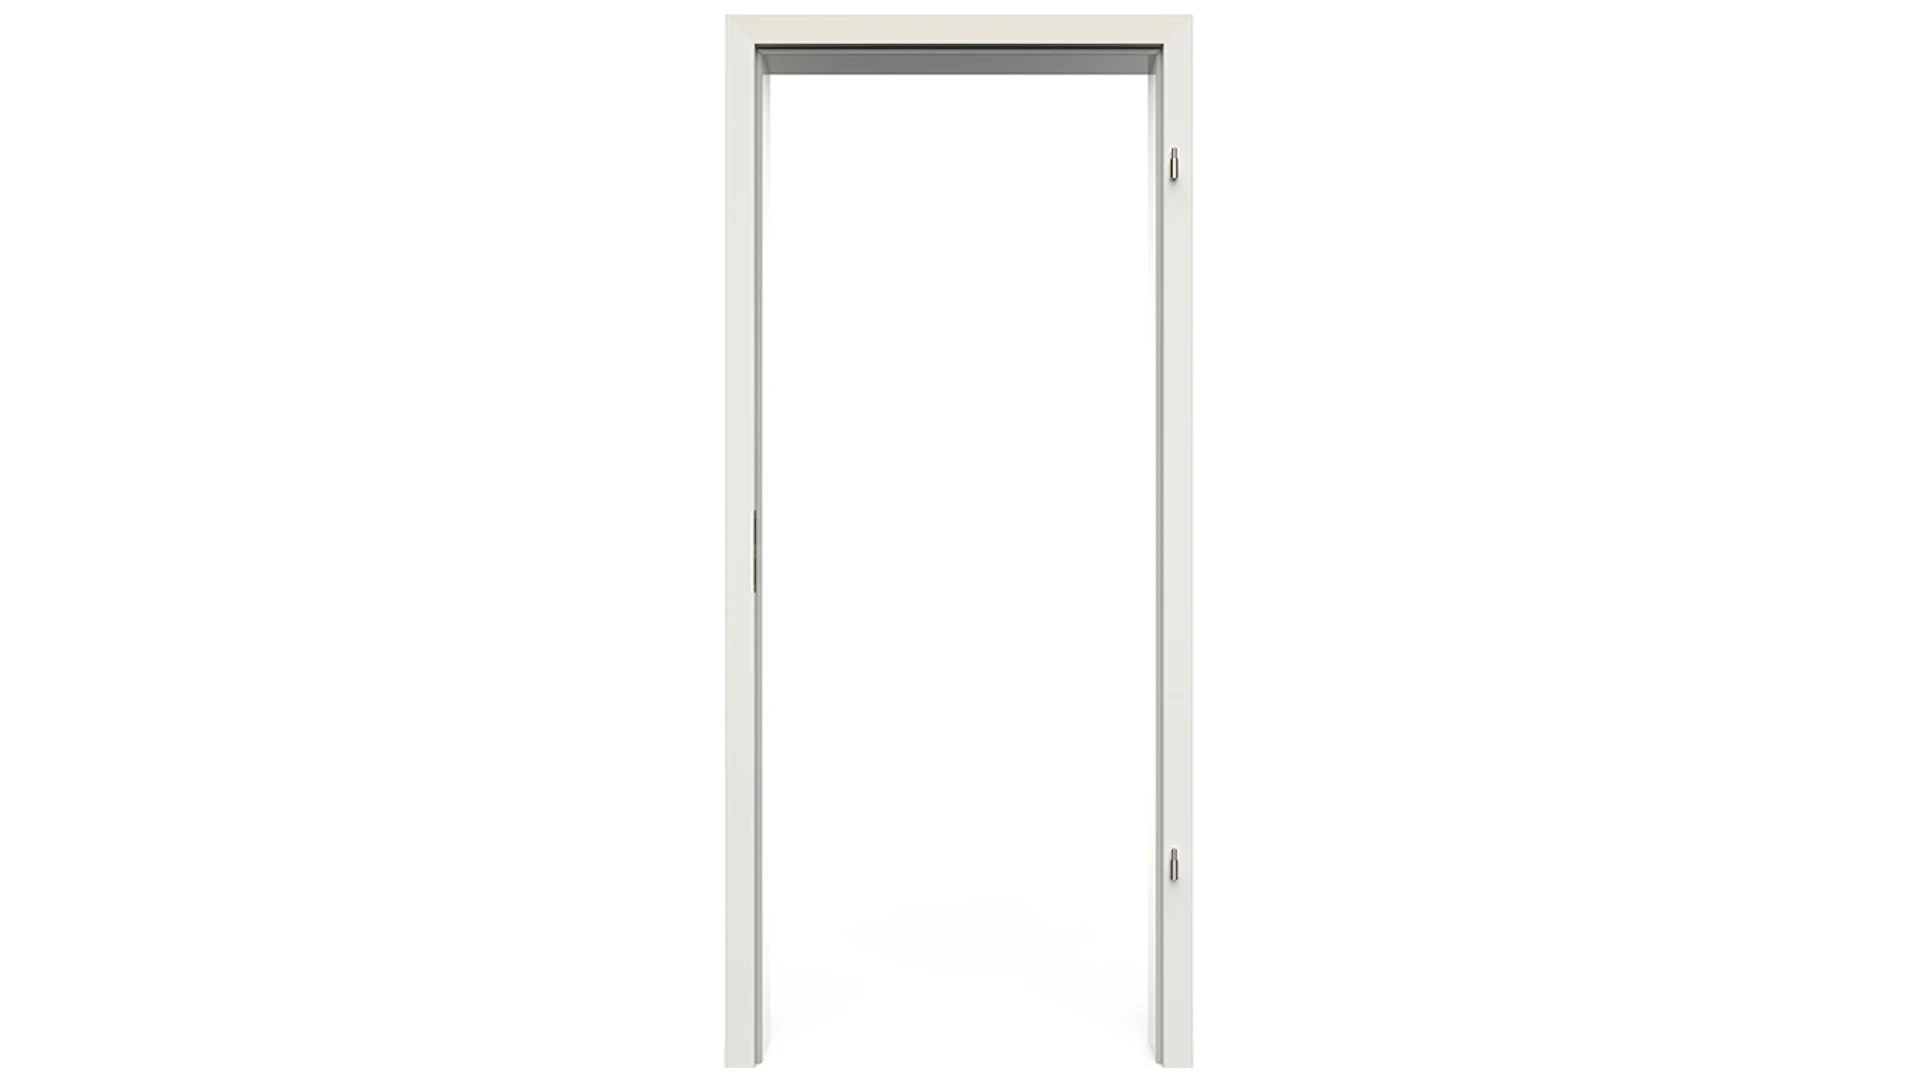 planeo Standard frame, rounded edge - CPL White 9010 - 2110 x 860 x 180 mm DIN right